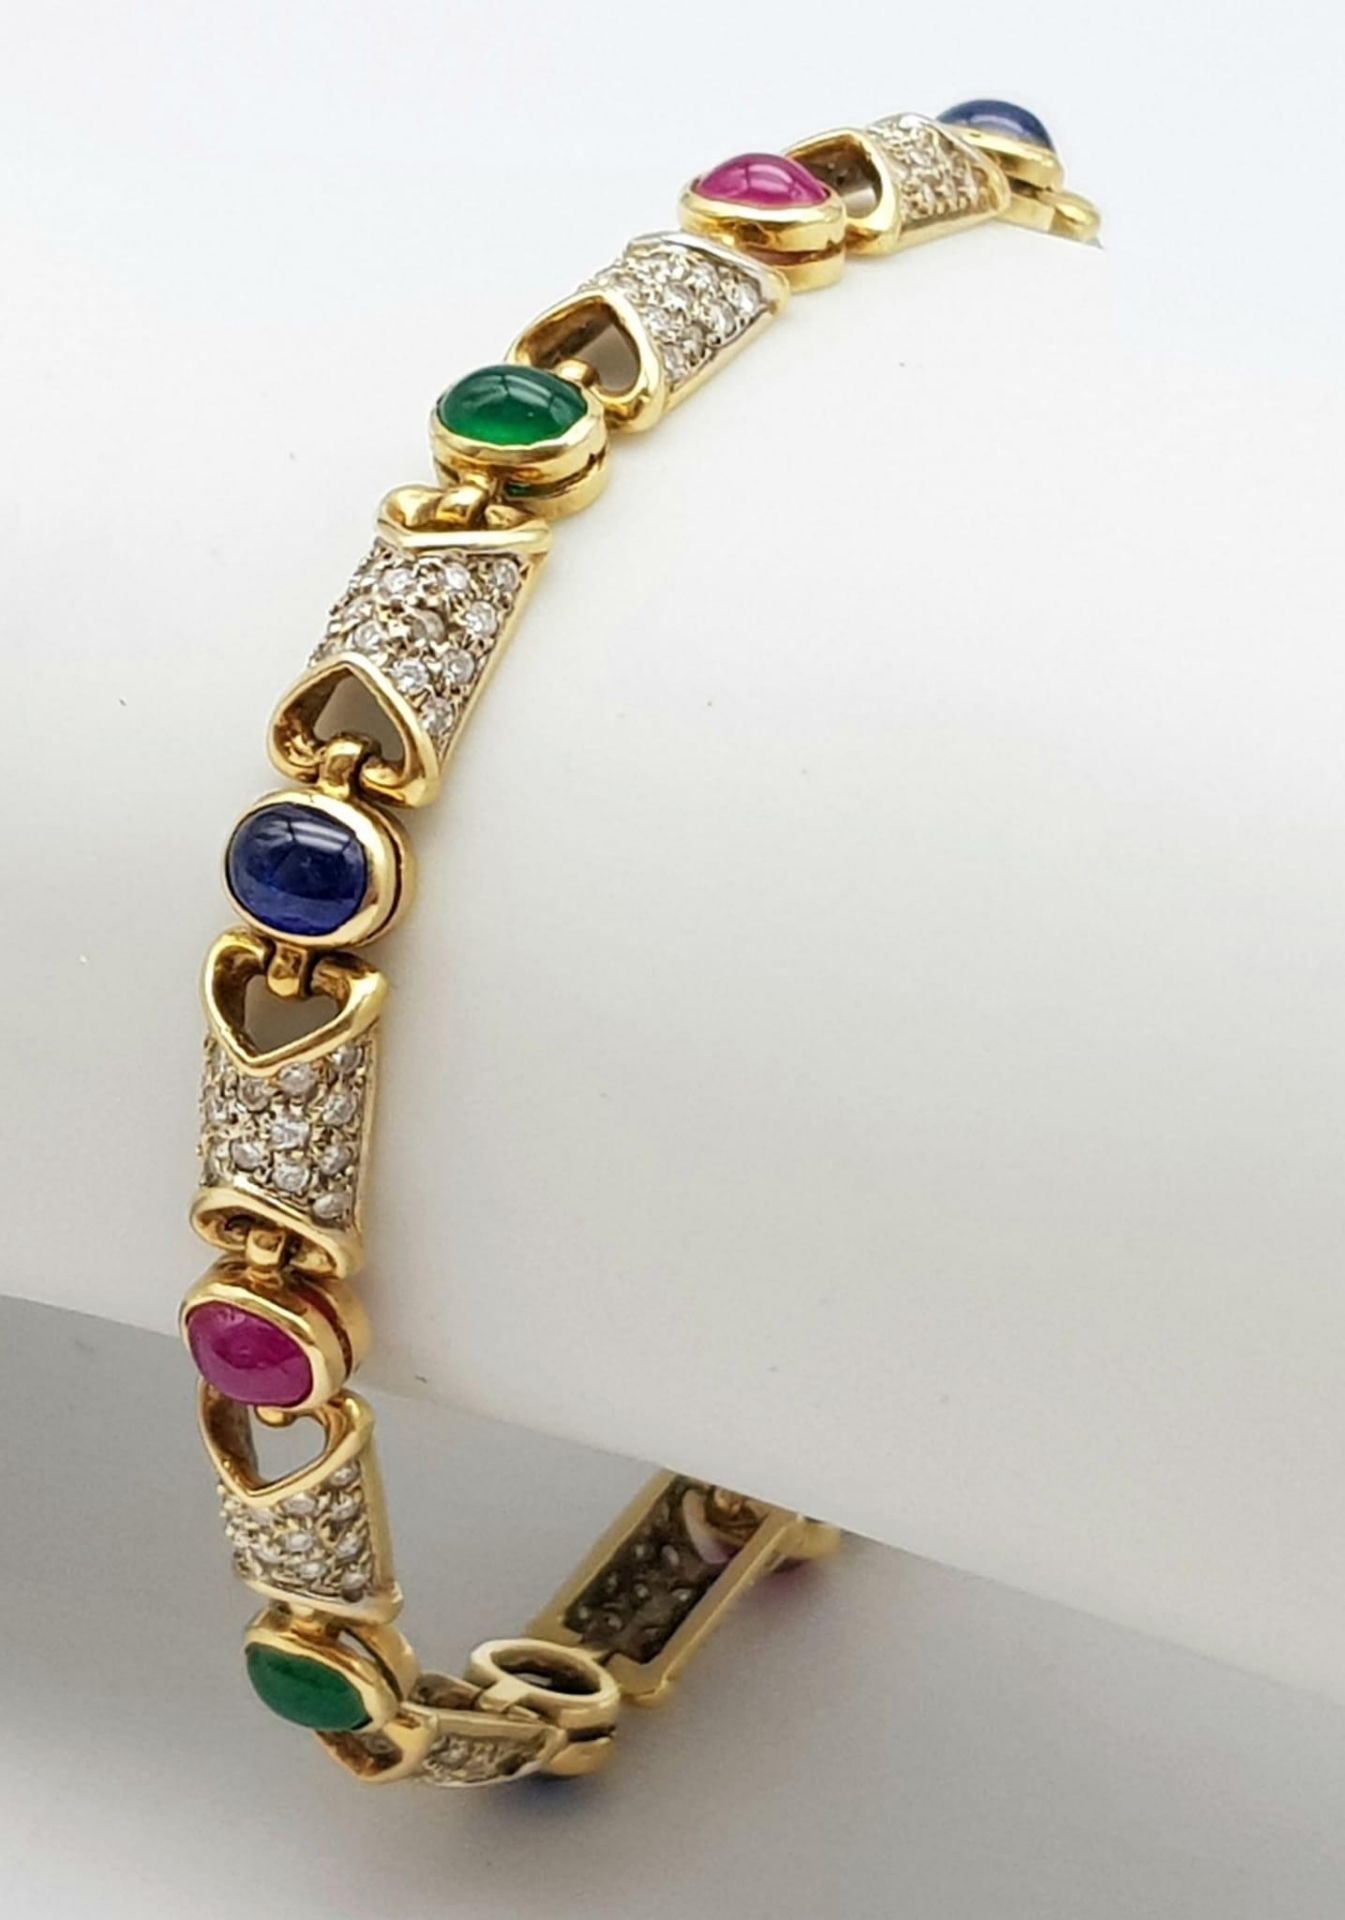 A GORGEOUS 18K YELLOW GOLD DIAMOND, SAPPHIRE, RUBY & EMERALD SET BRACELET. 1.50CTW OF ENCRUSTED - Image 2 of 6